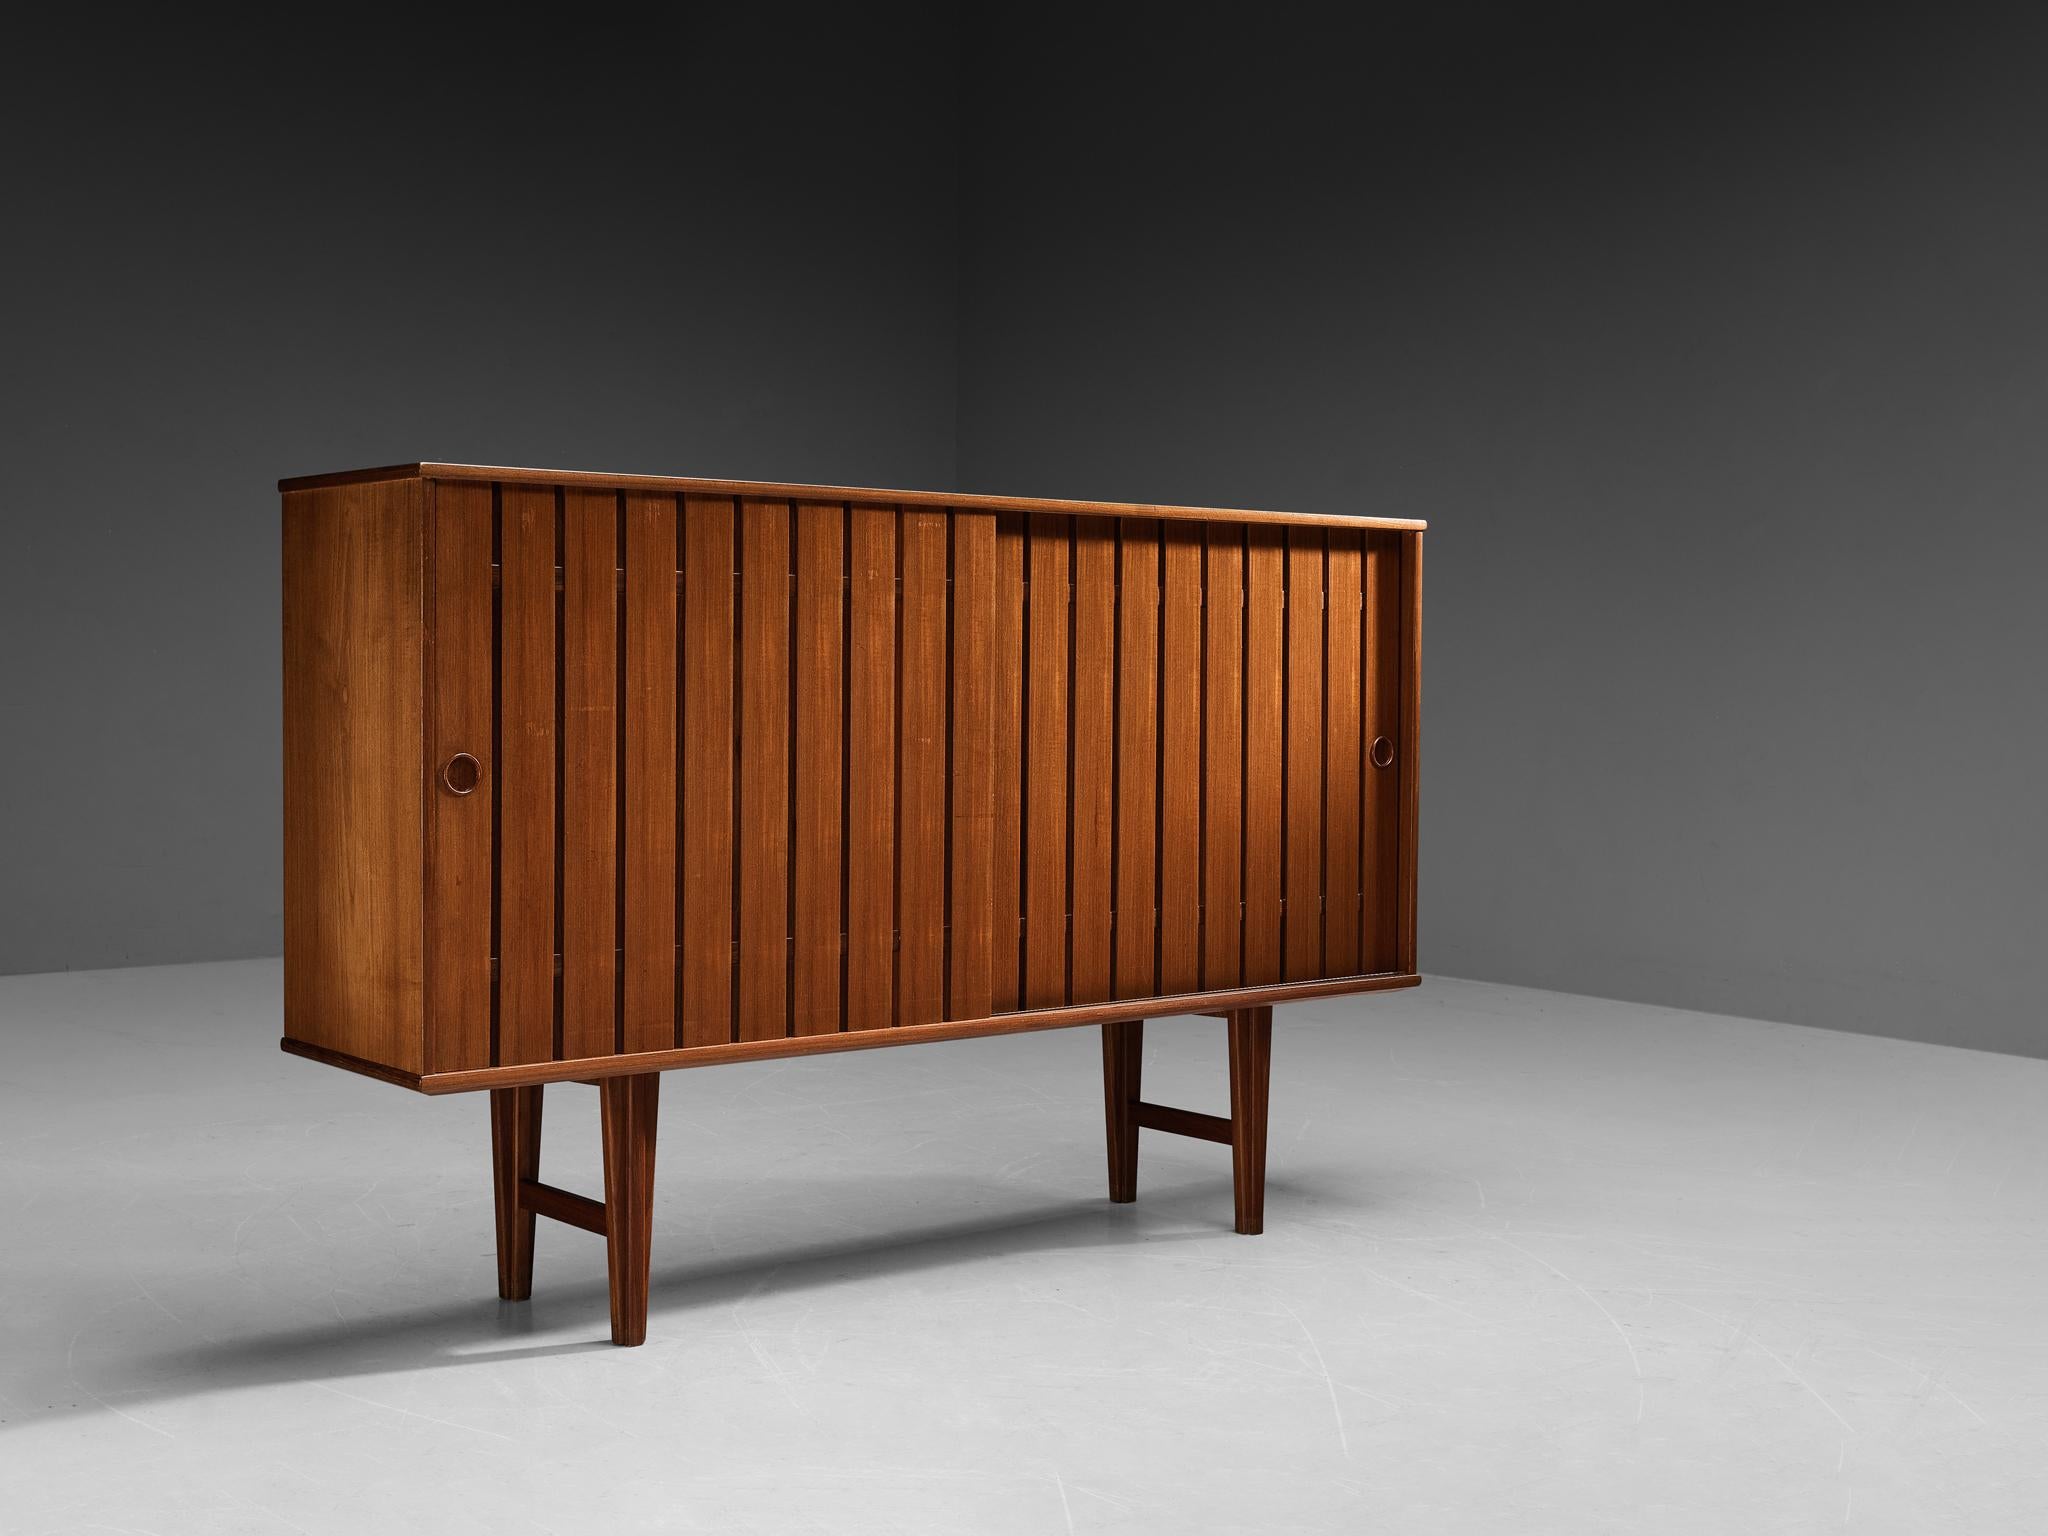 Sideboard, teak, Scandinavia, 1960s

This very elegant and slender sideboard is made in the 1960s in Scandinavia. The two slatted sliding doors in front both have a recessed handle, keeping a clean aesthetic. The interior offers plenty of storage